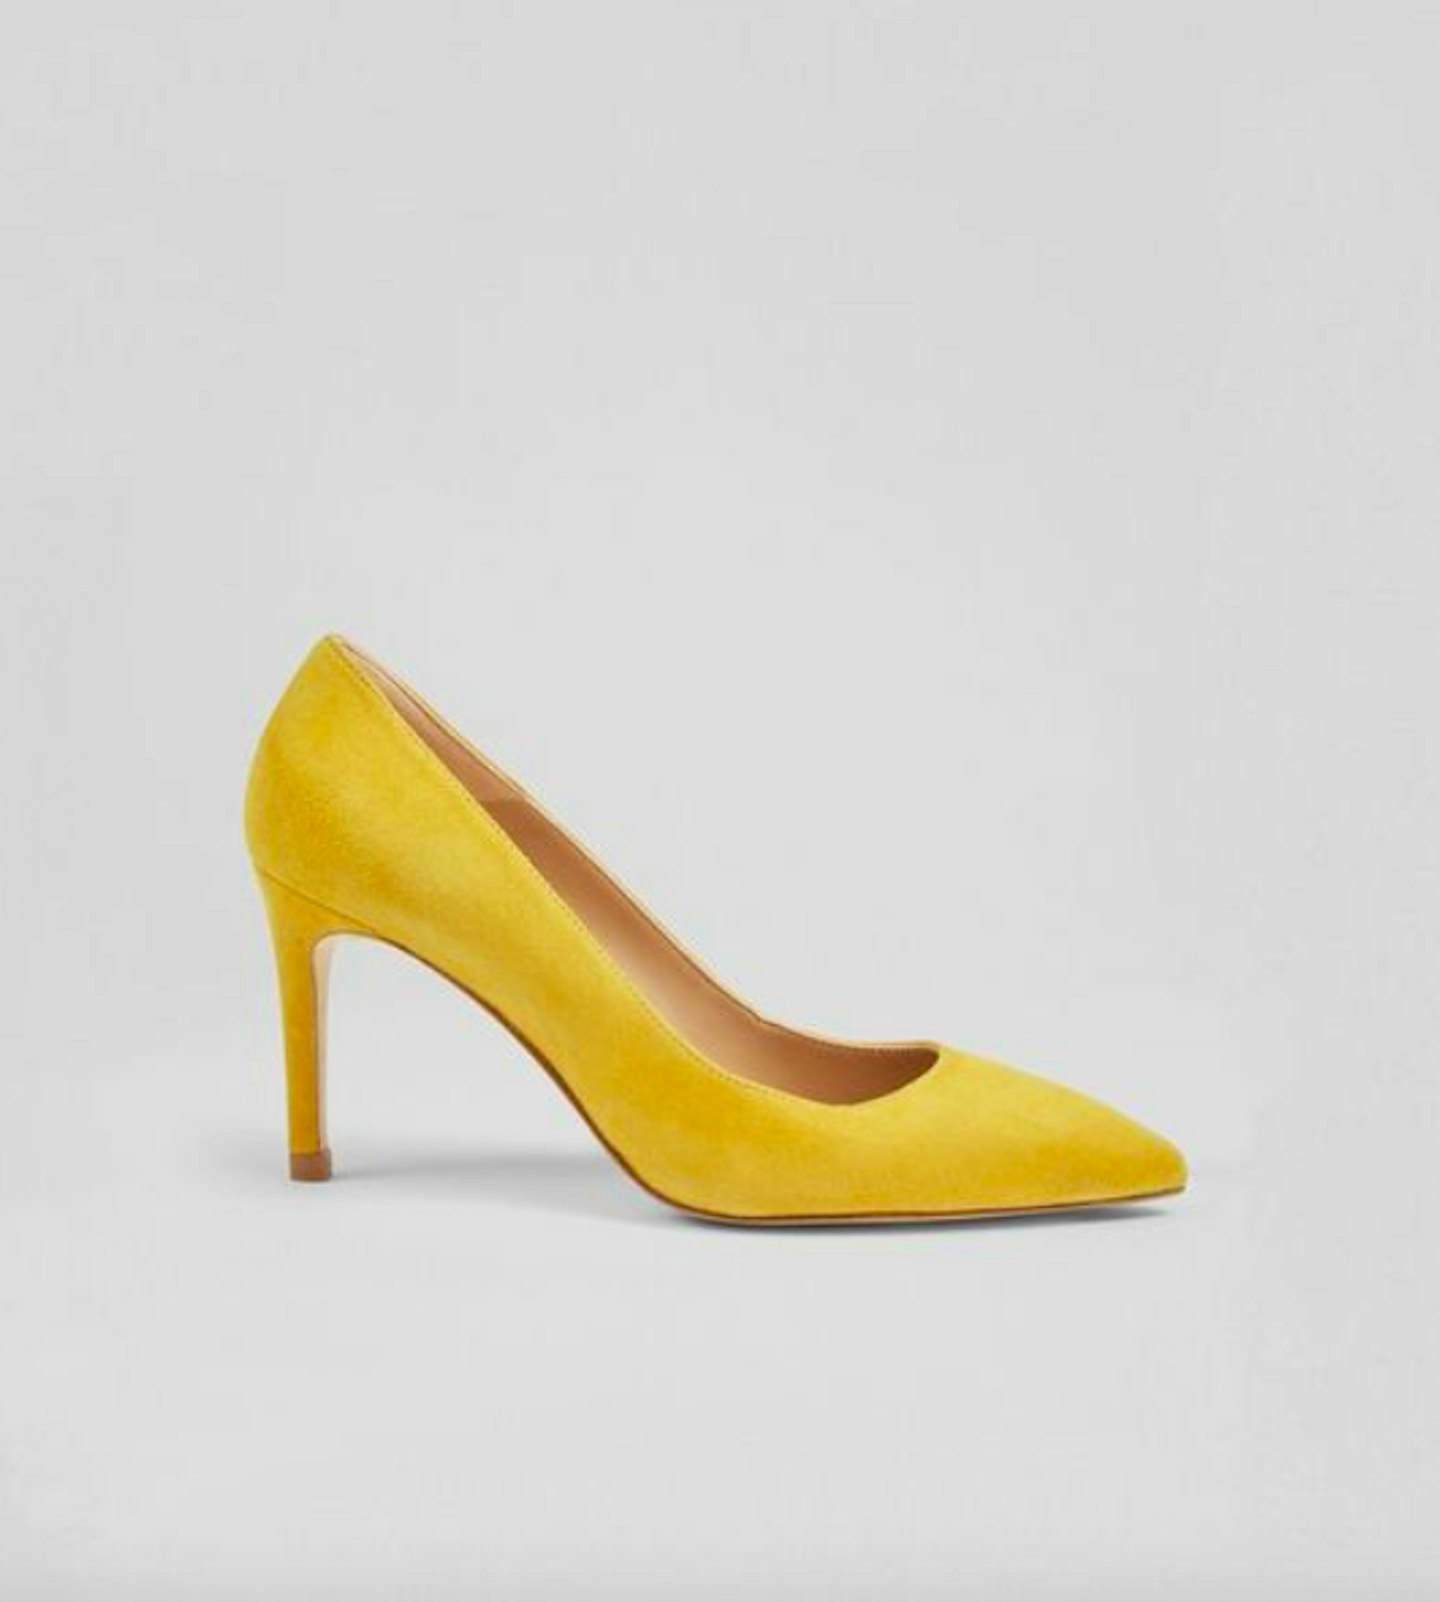 LK Bennett, Floret Yellow Suede Closed Courts, WAS £195 NOW £78